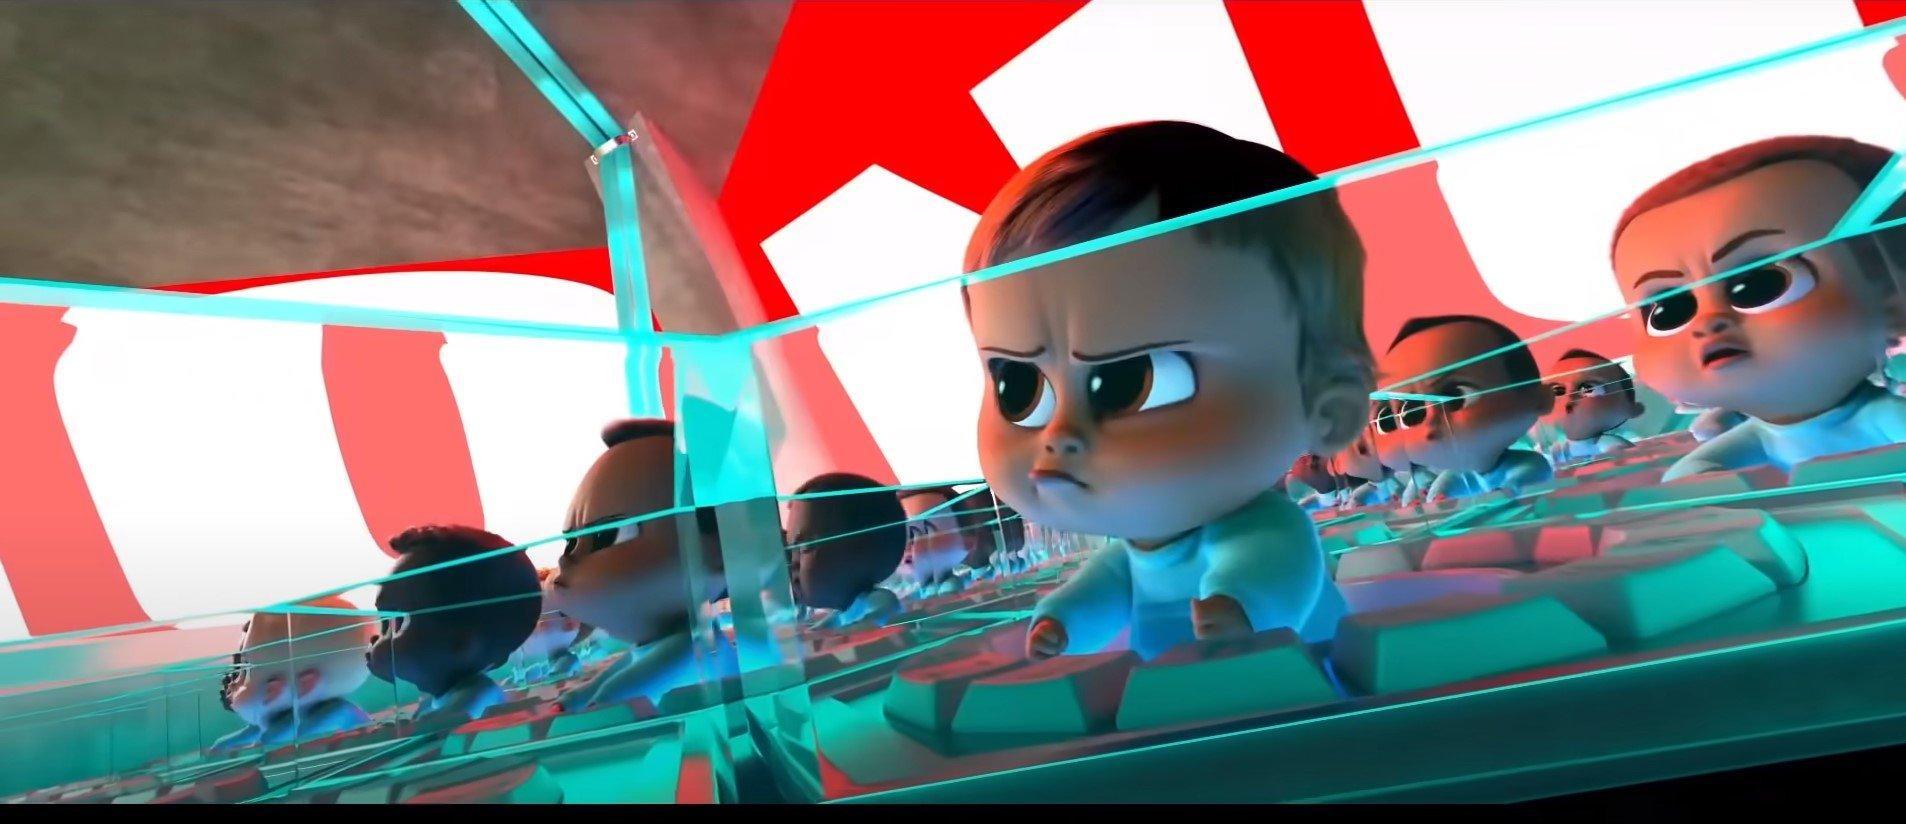 The Boss Baby 2: Family Business 